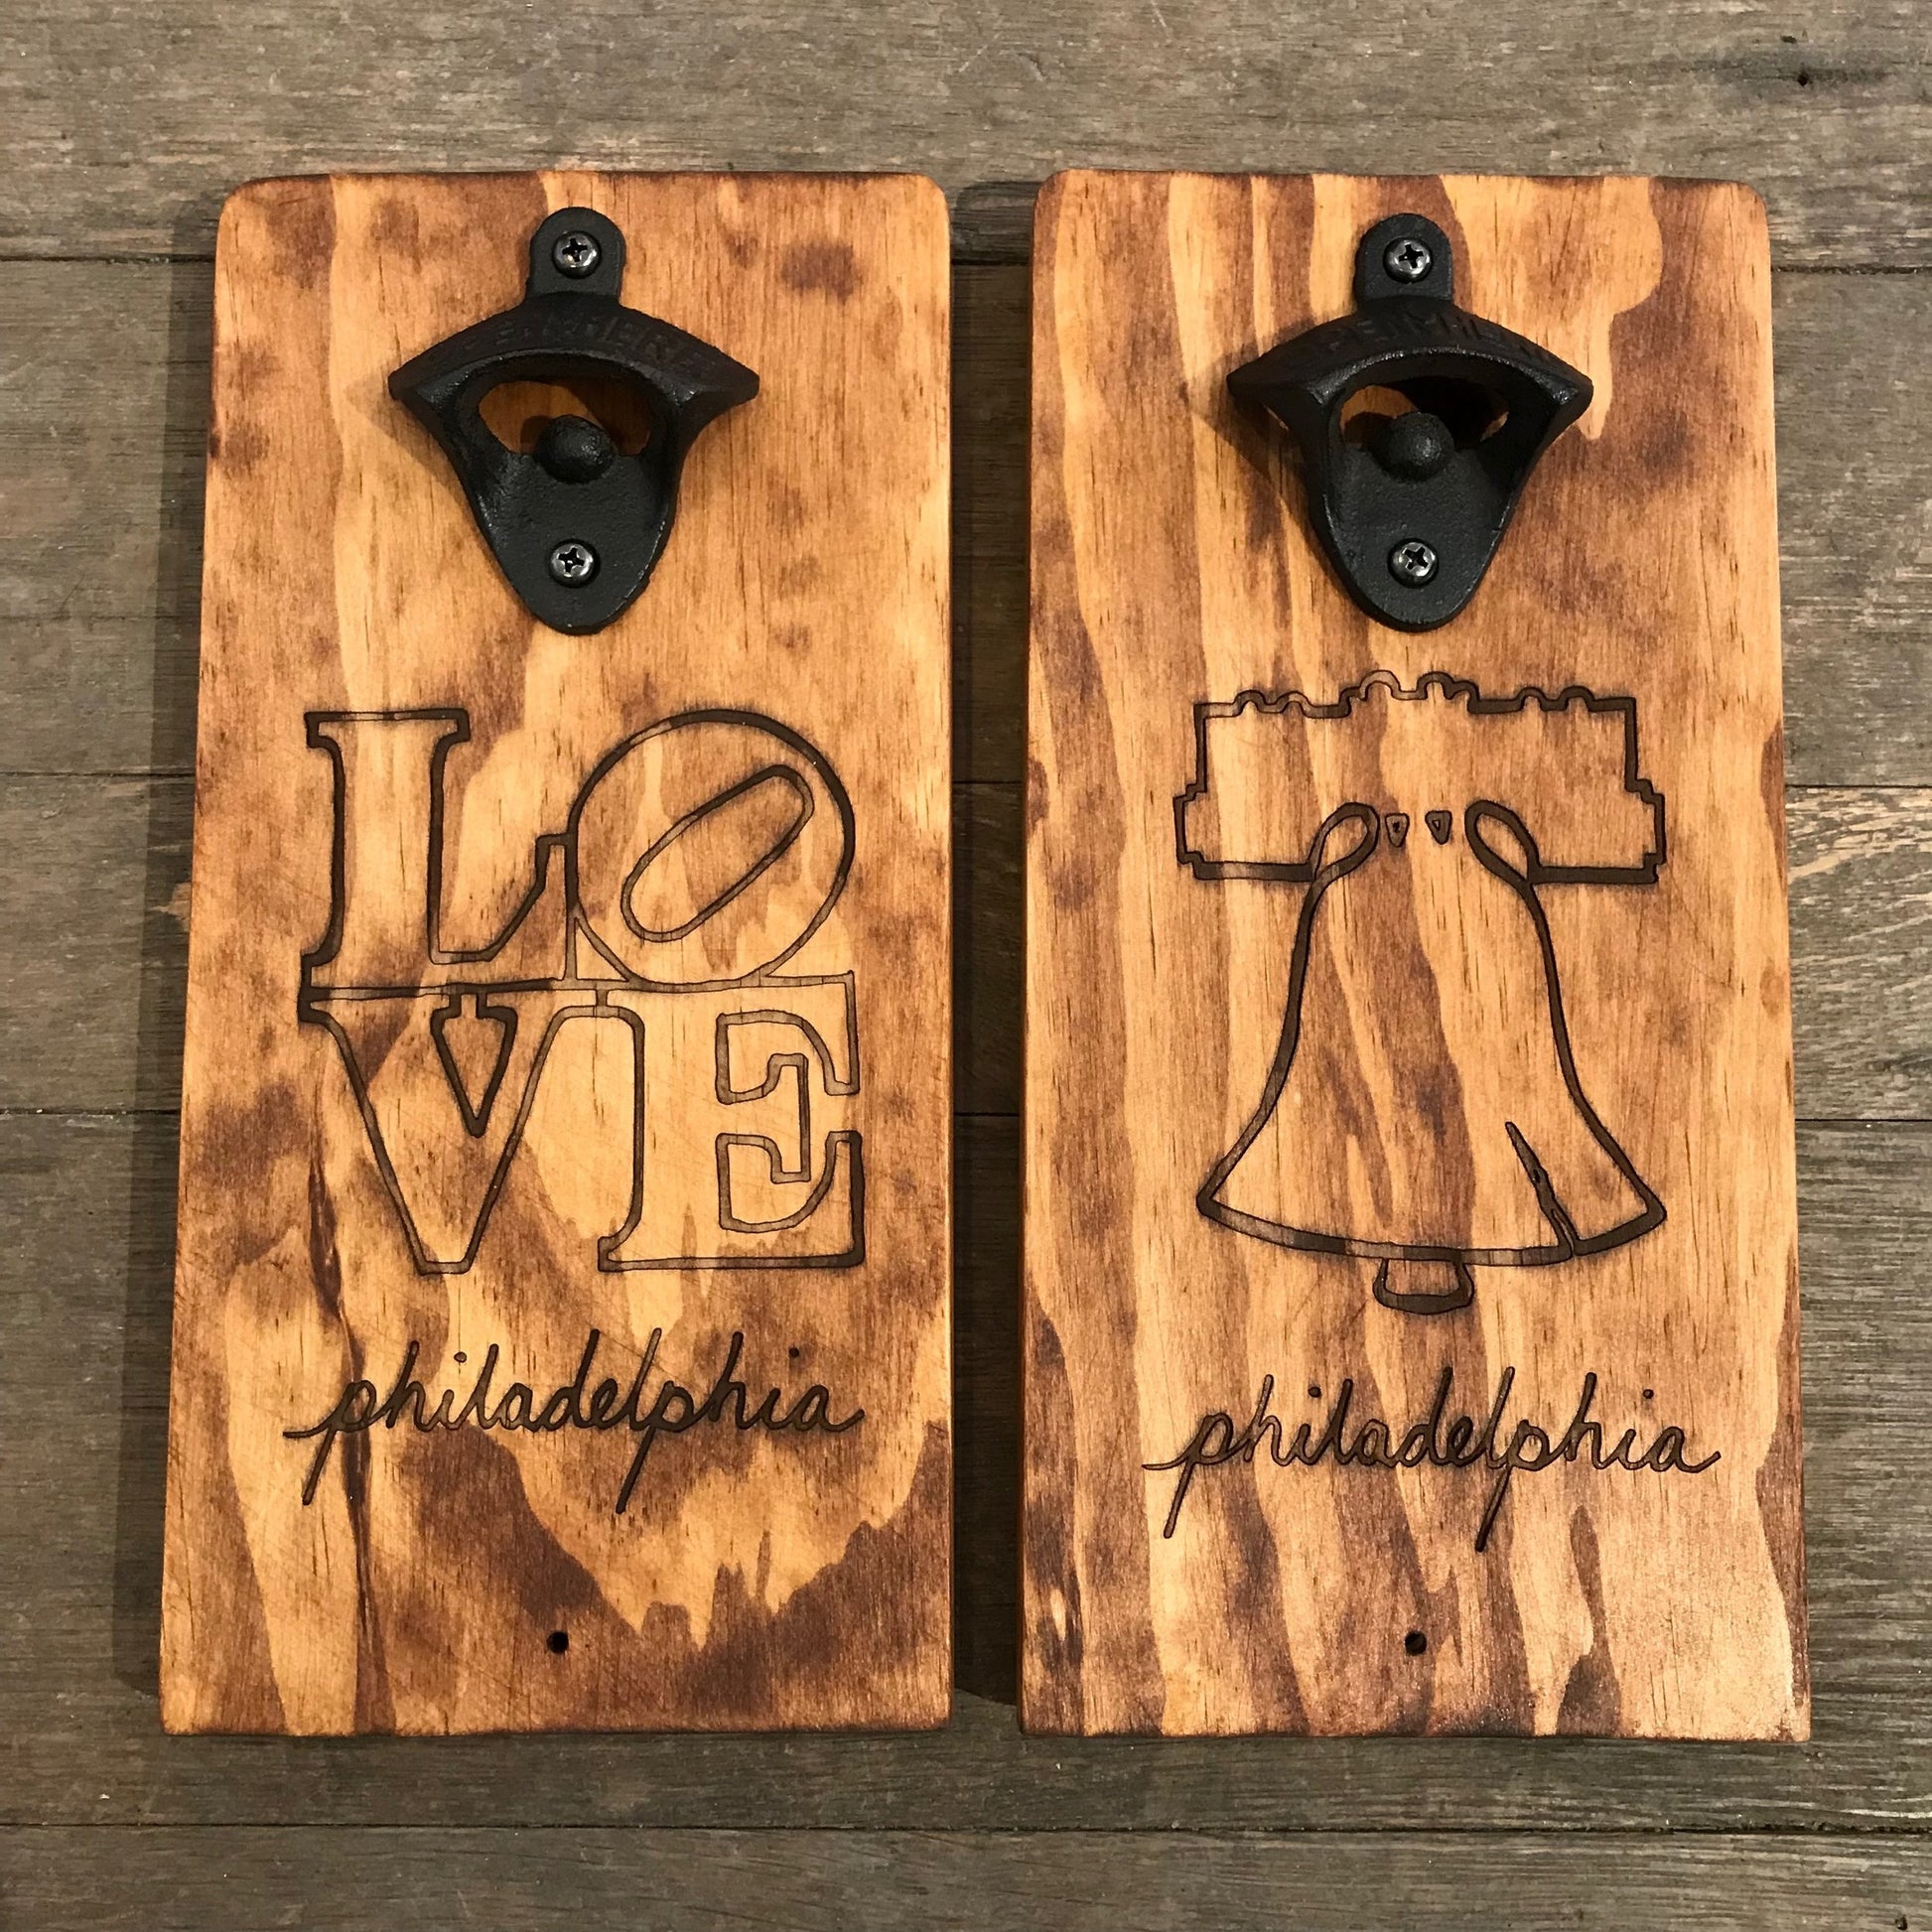 Two Philly Phlights Philly Wall-Mounted Bottle Openers laser-etched with "Love Philadelphia" and the iconic Liberty Bell, mounted on a rustic wood background.